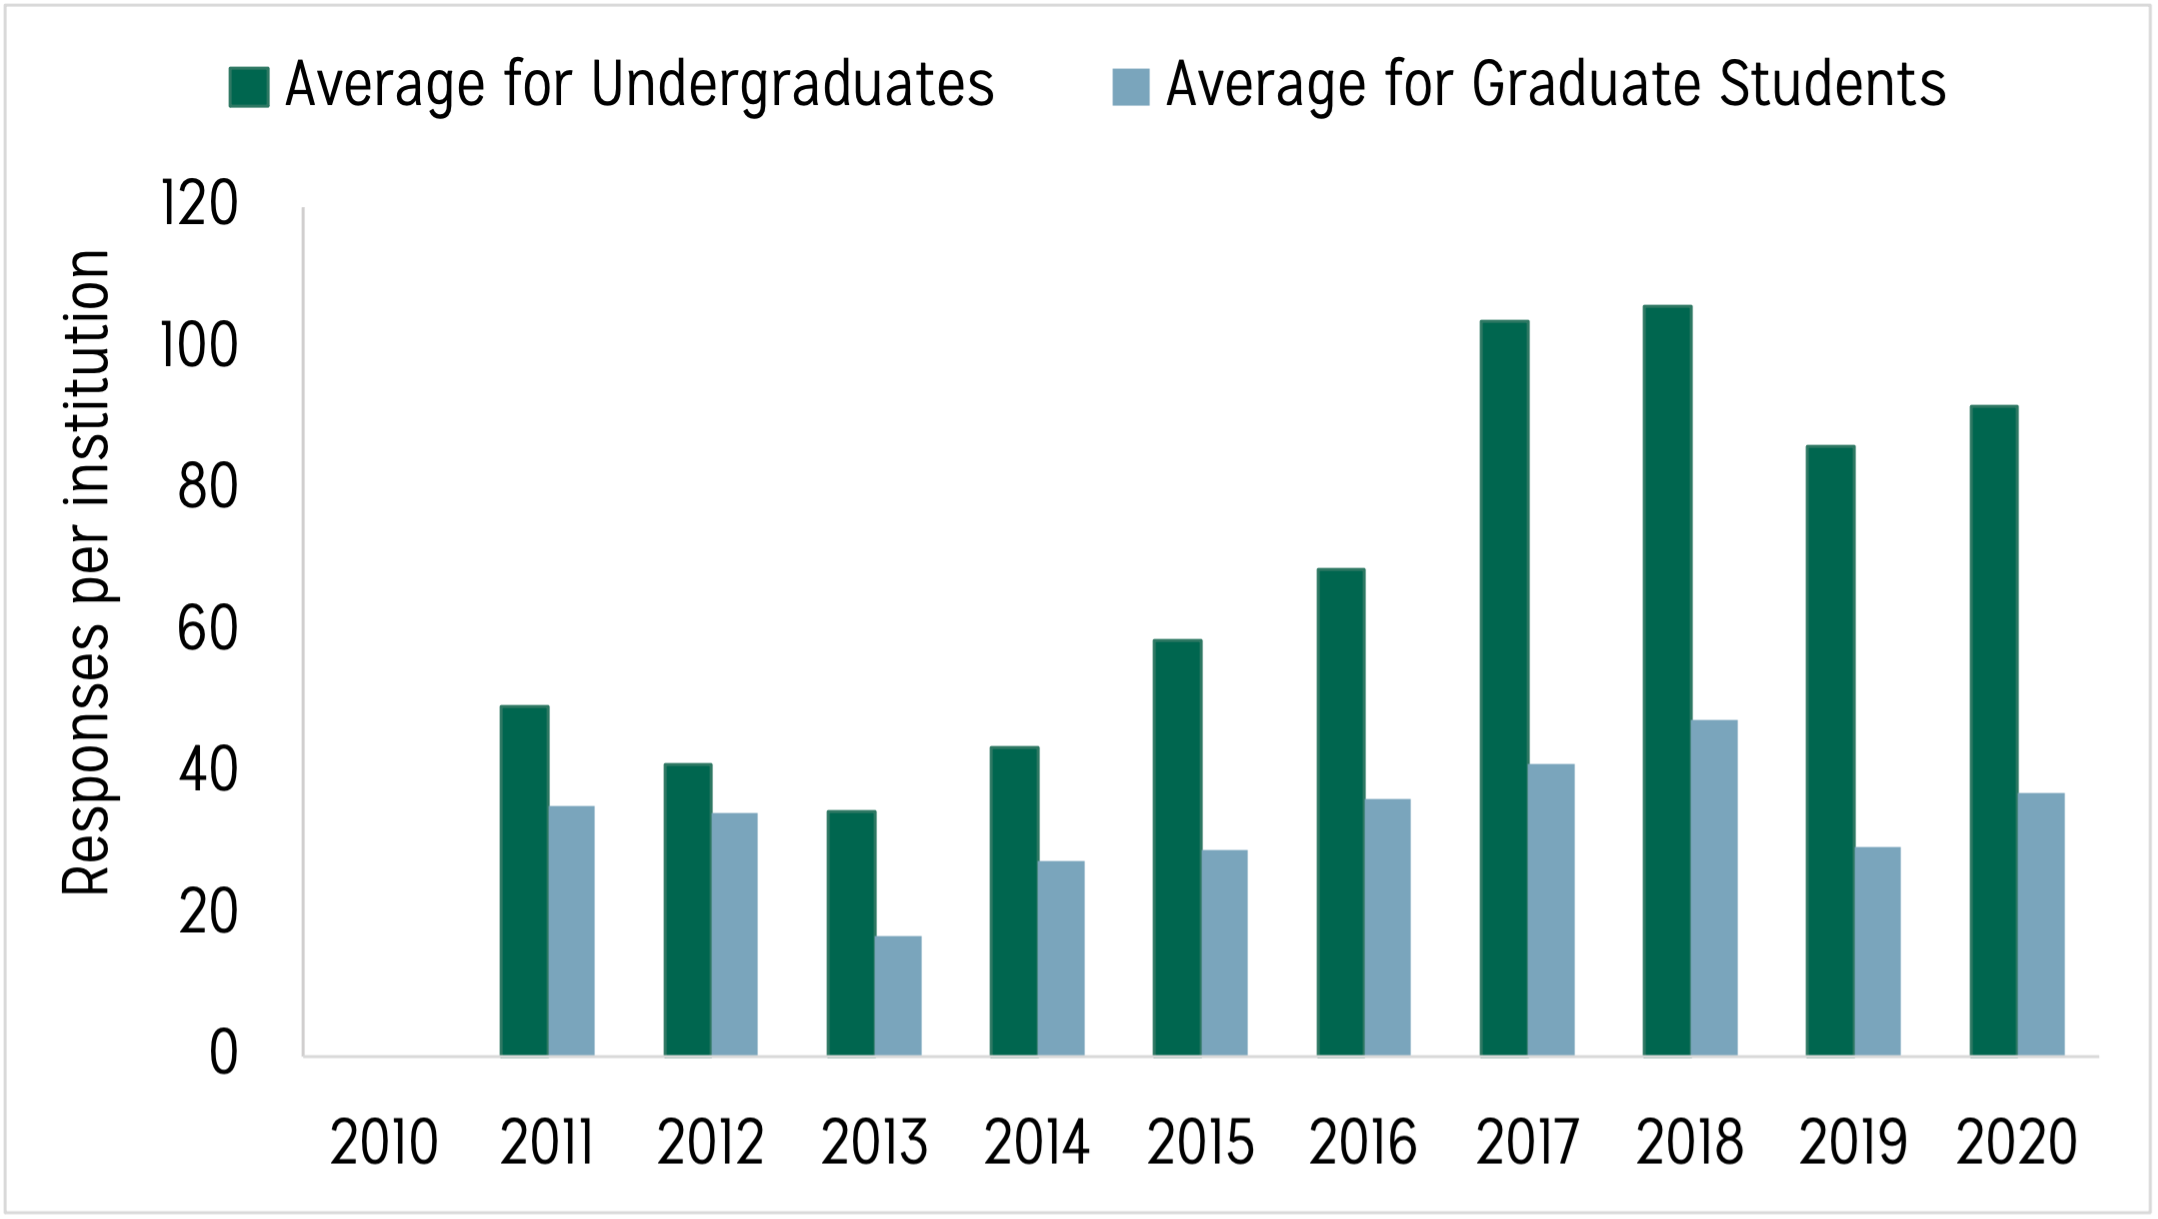 Bar chart displaying two sets of bars. The first set of bars displays the average number of undergraduate student responses received per Data Buddies institution from 2010 to 2020. The second set of bars displays the average number of graduate student responses received per Data Buddies institution from 2010 to 2020